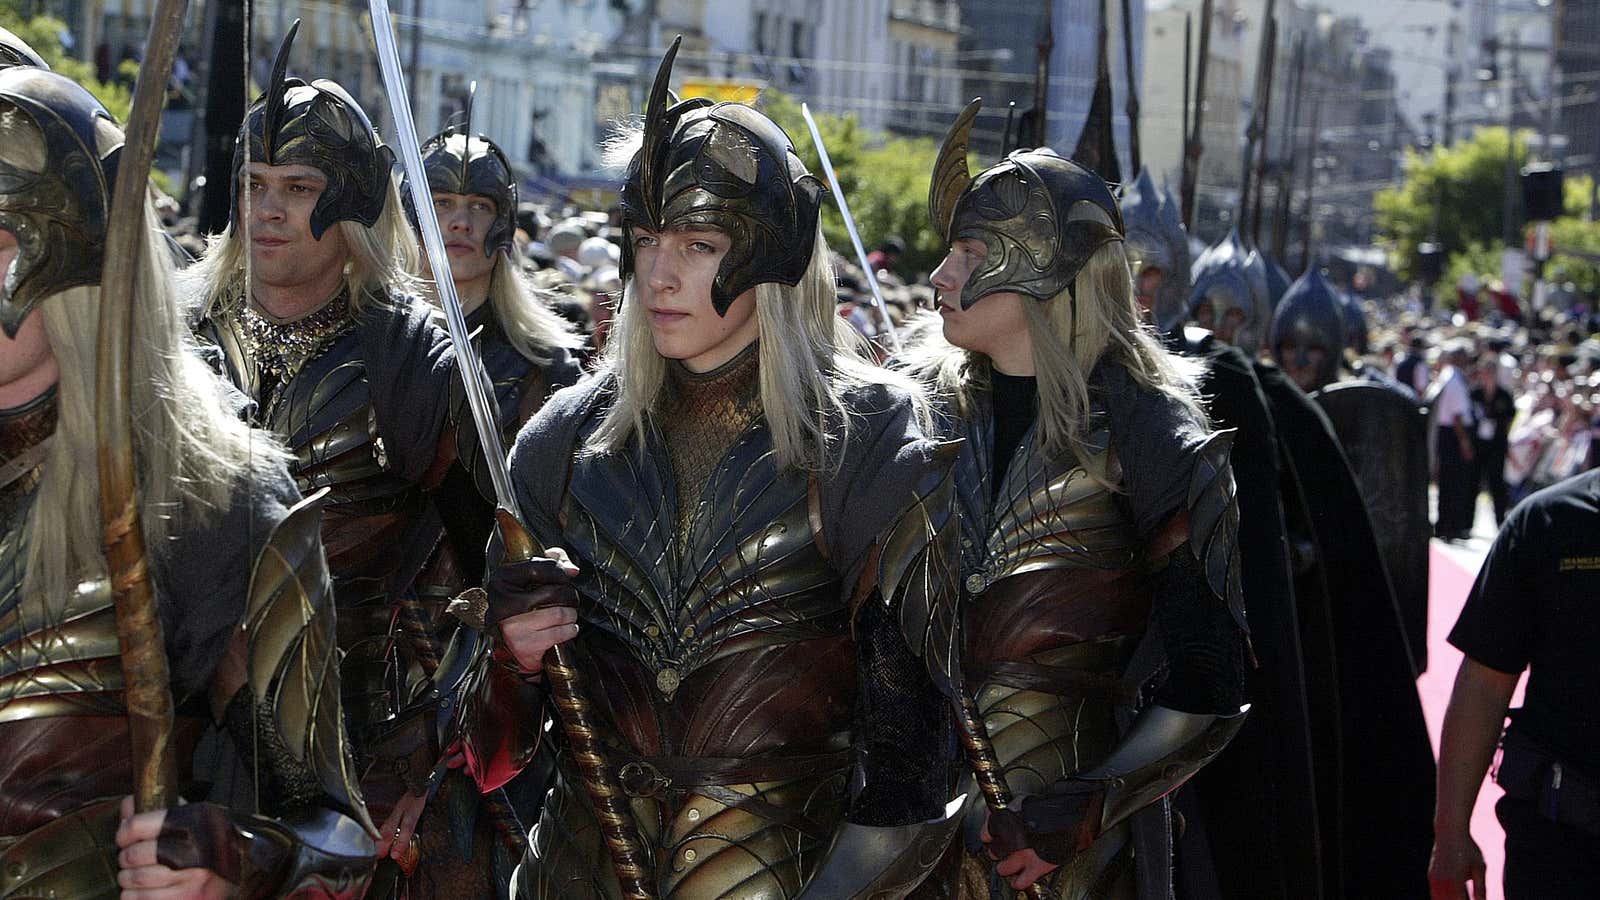 A parade at the 2003 world premiere of “Lord of the Rings: The Return of the King” in Wellington, New Zealand.